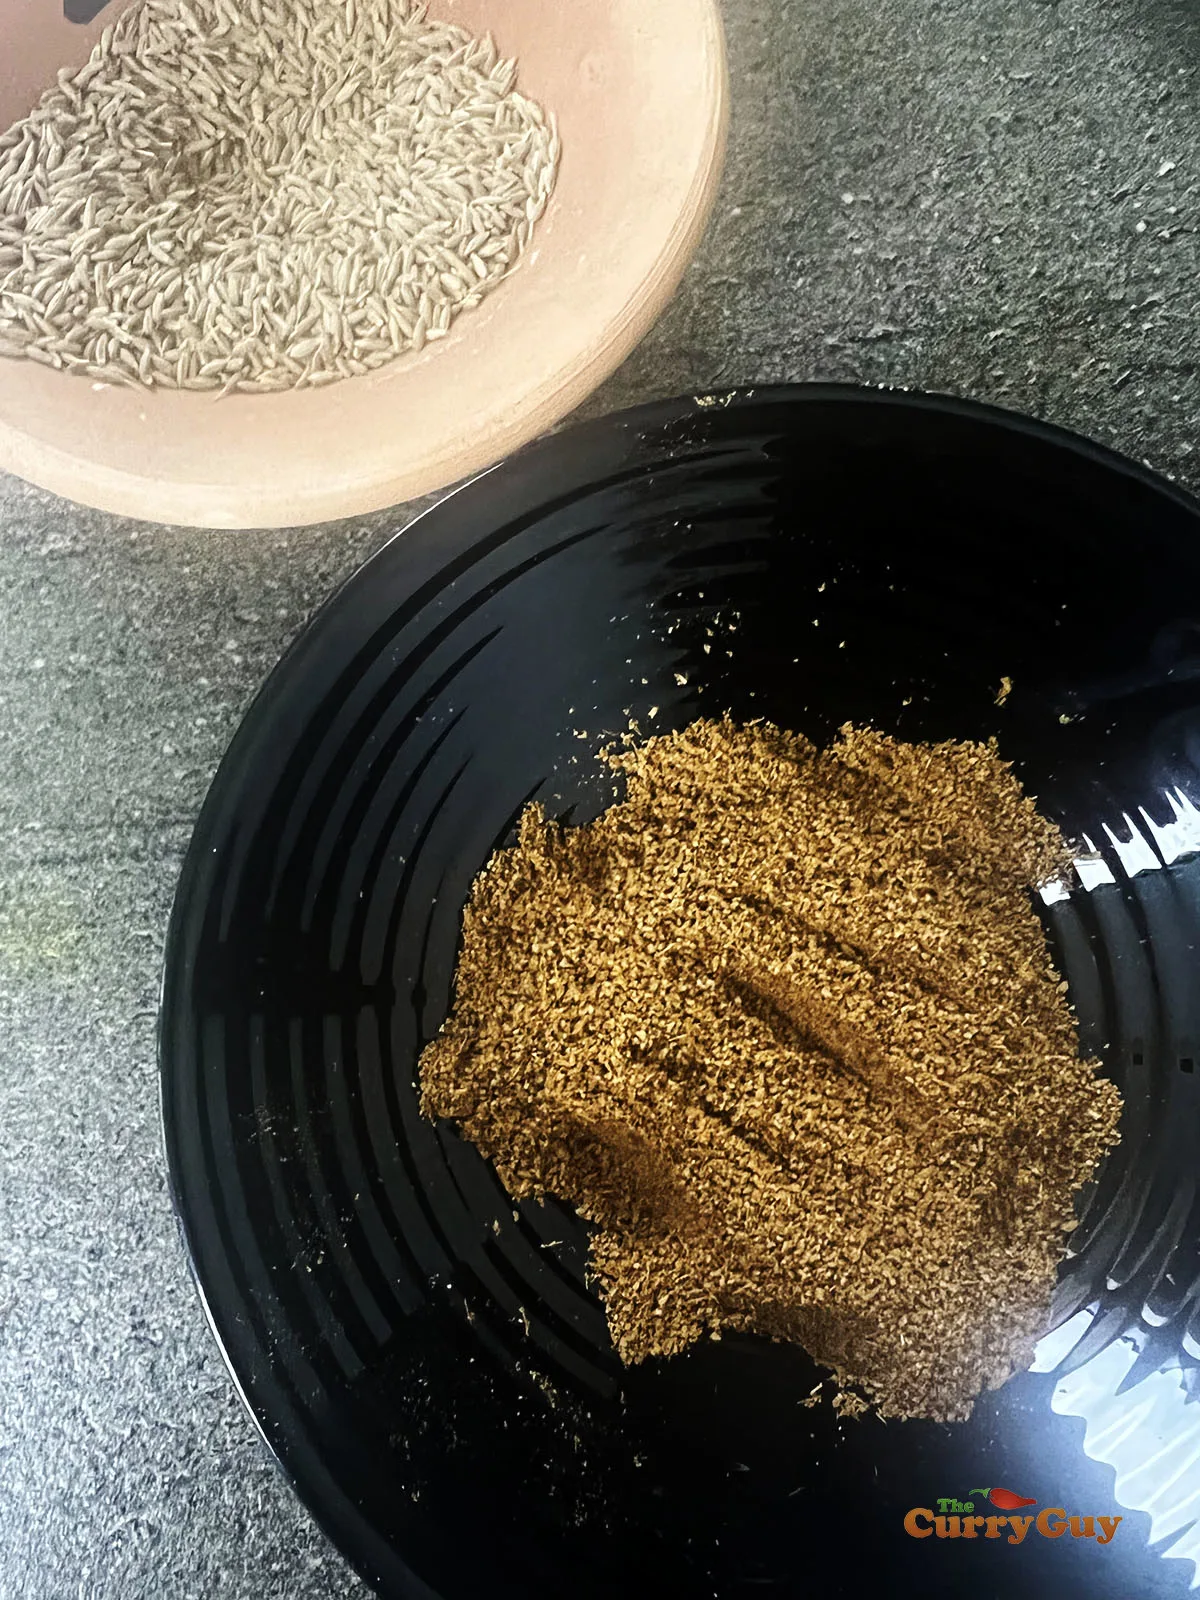 Ground cumin with whole cumin seeds also in view.